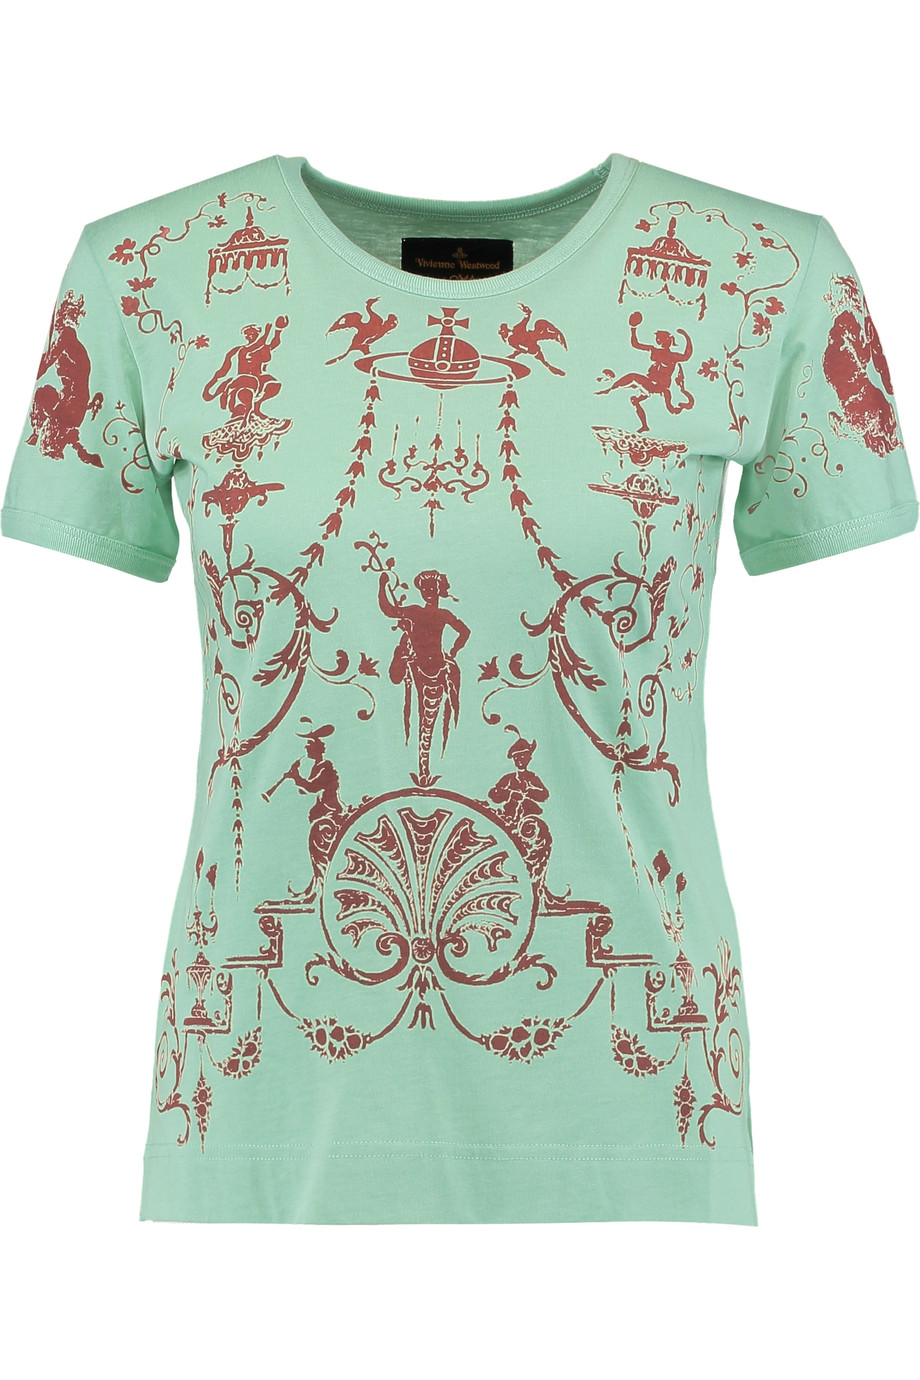 Vivienne Westwood Anglomania Printed Cotton-jersey T-shirt | ModeSens